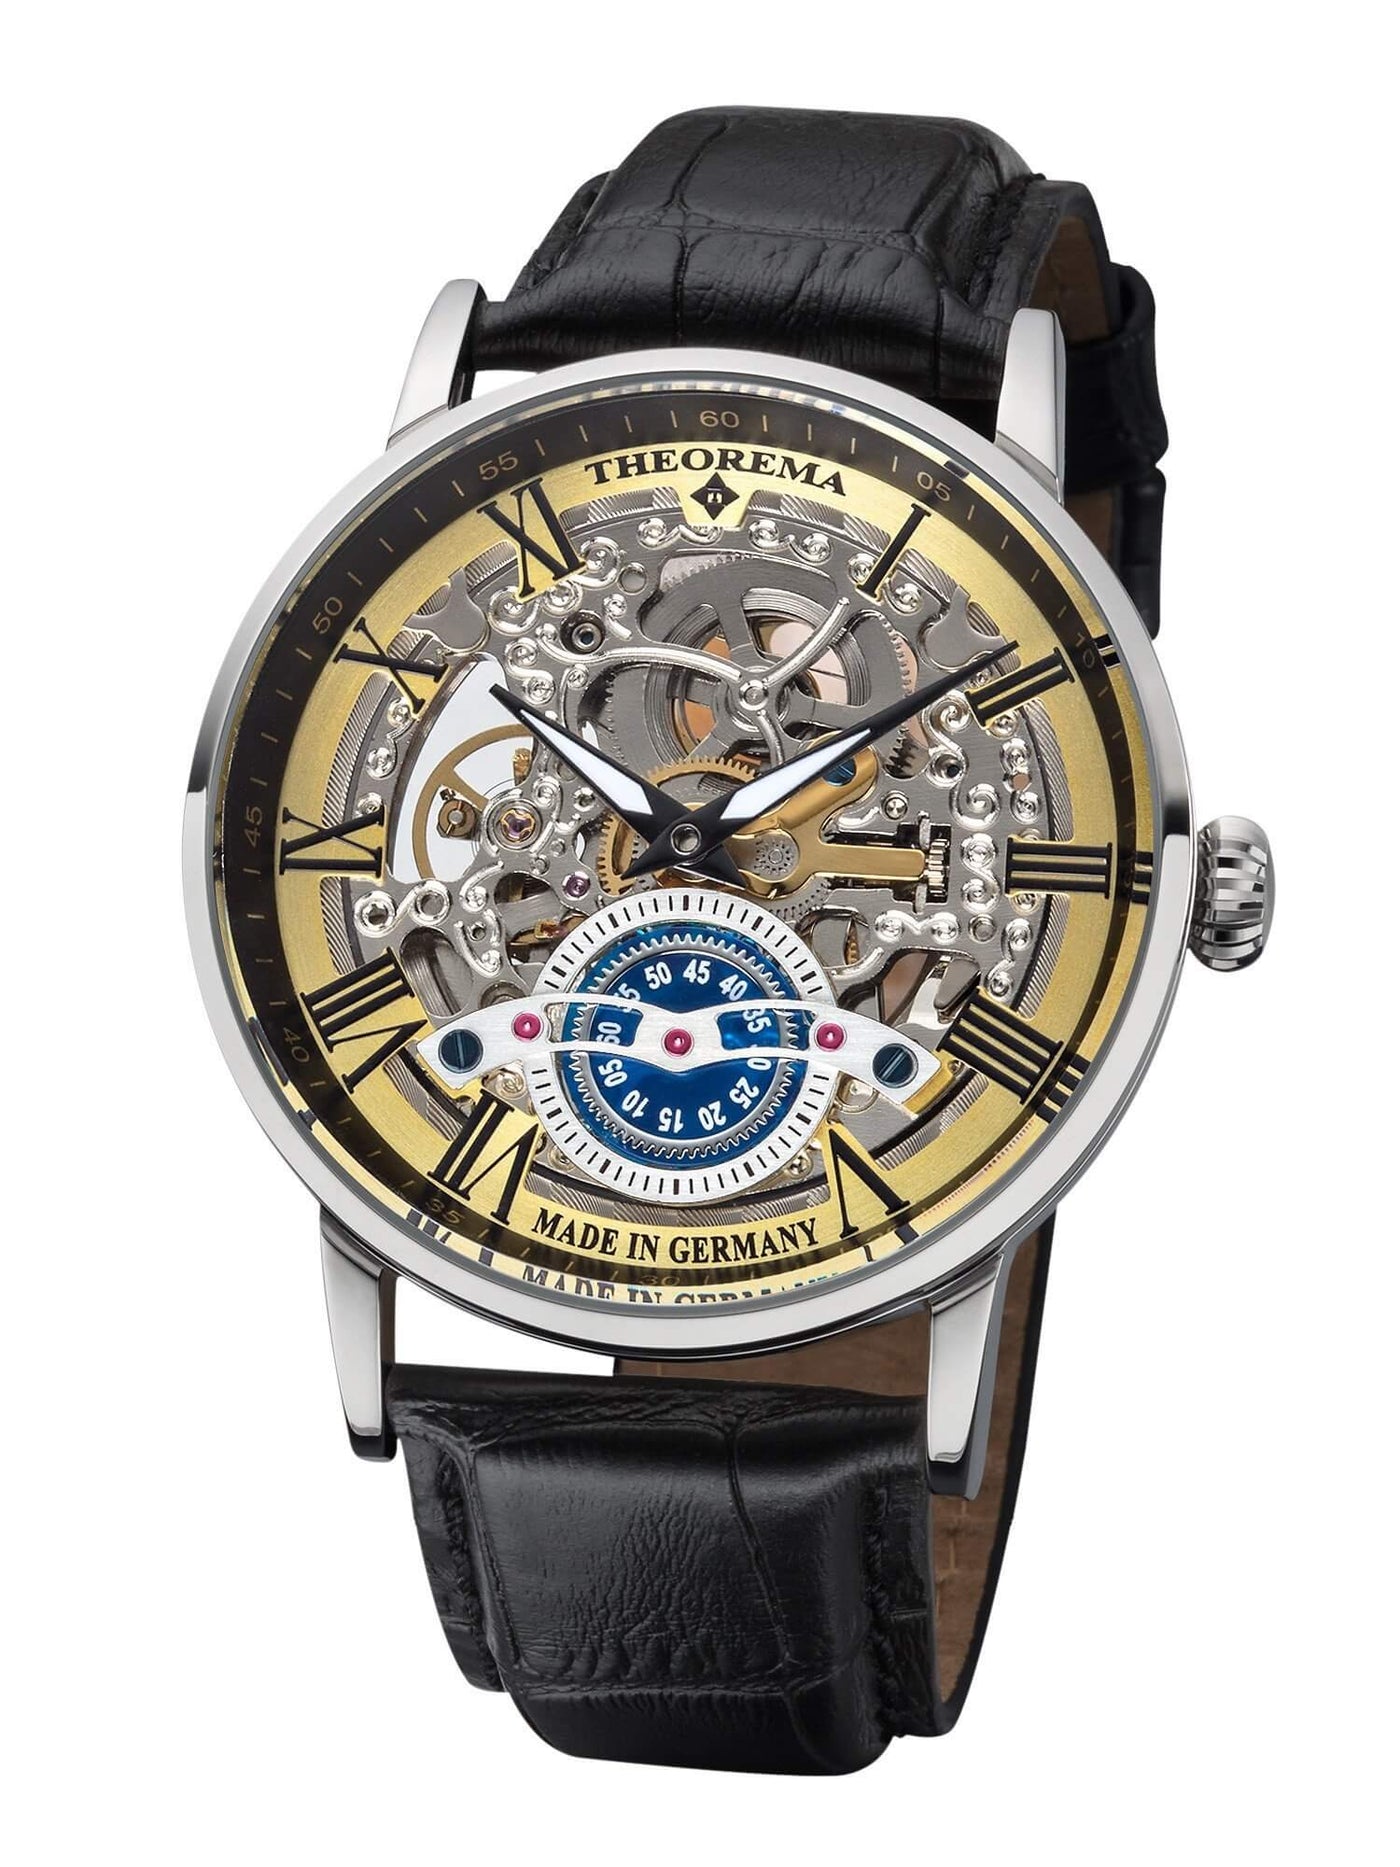 Skeletonized see-through silver dial with Roman numerals with black leather band.